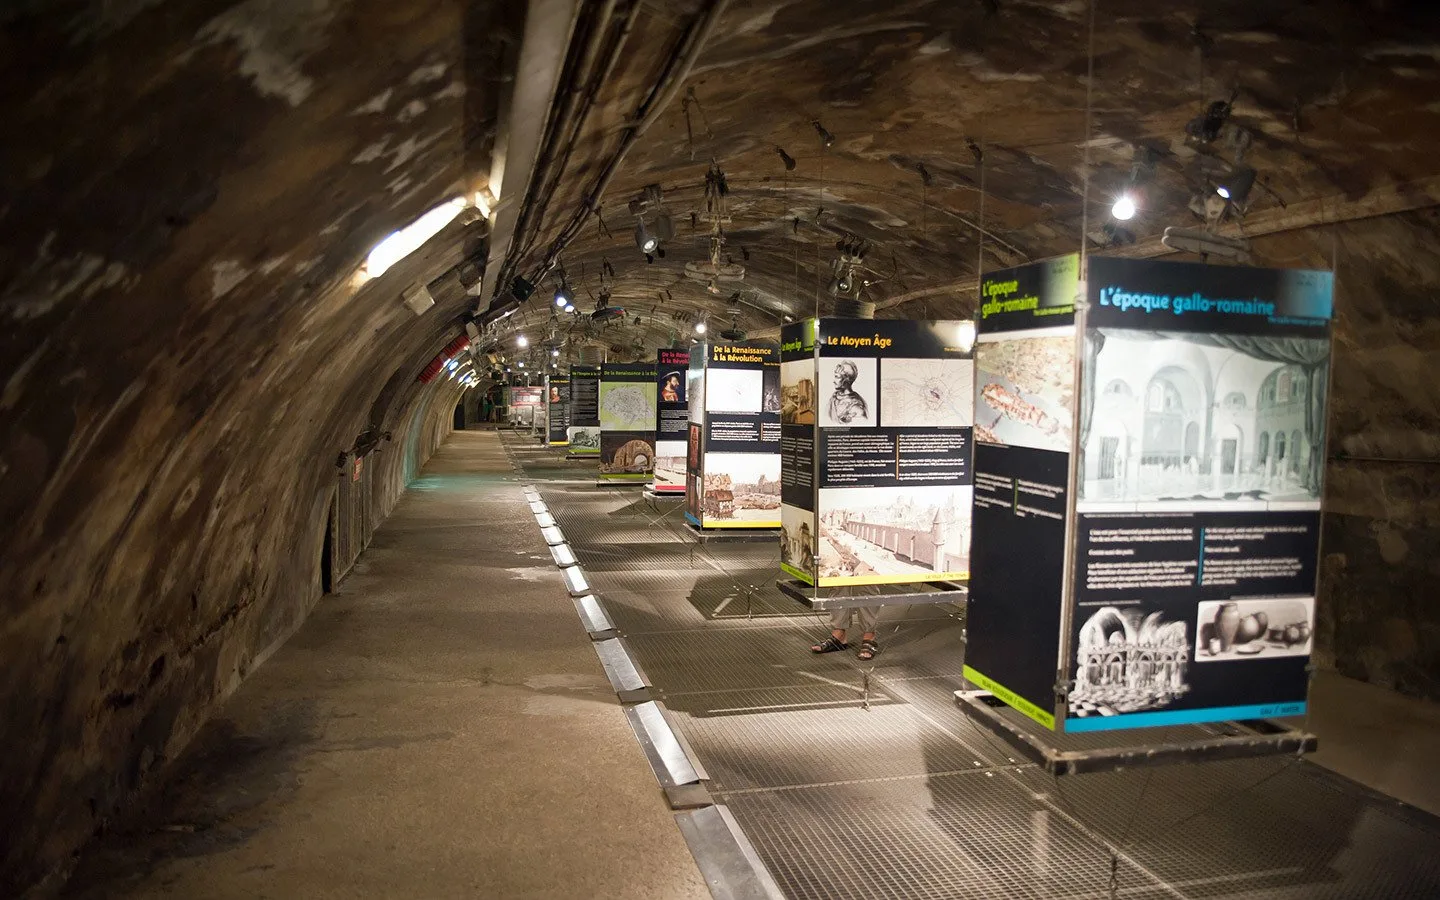 Exhibits down in the tunnels at the Paris Sewer Museum